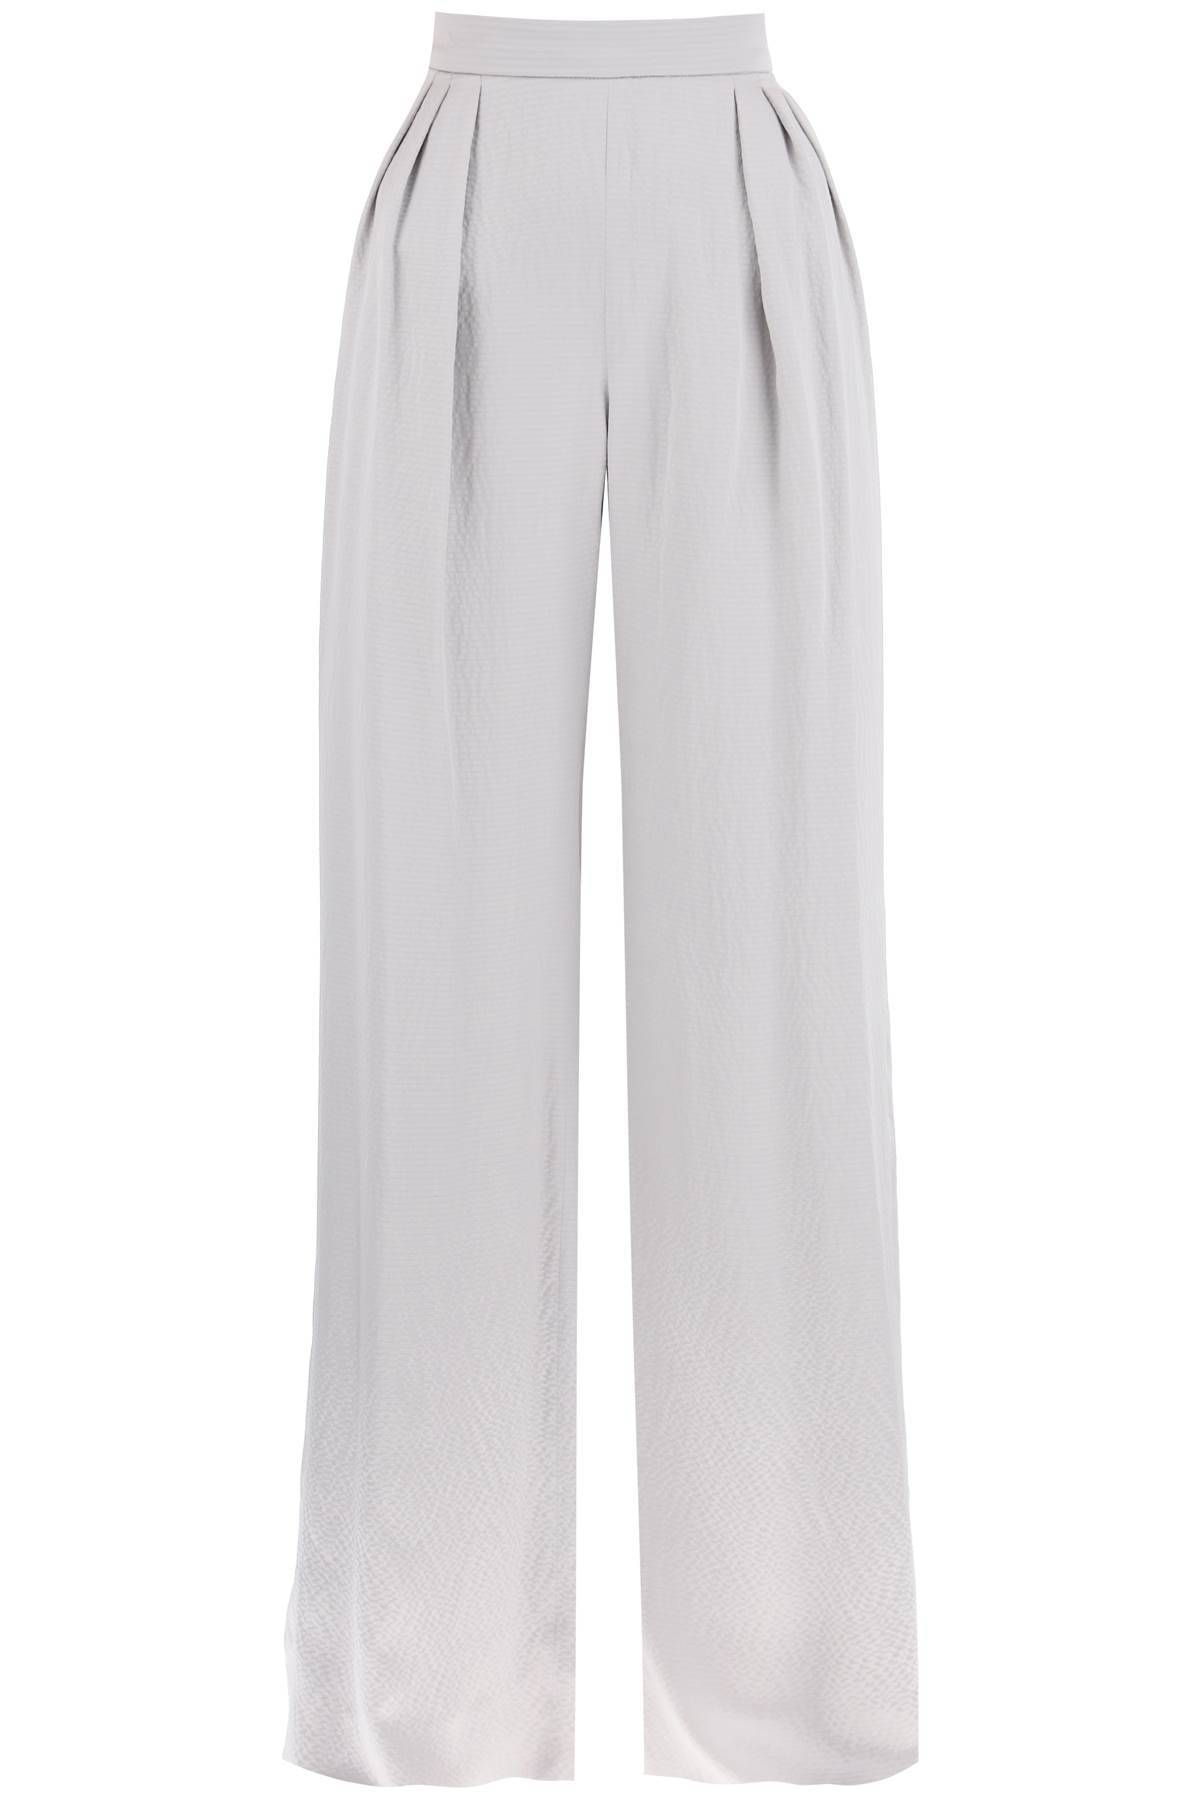 Max Mara Uncino Satin Trousers With Pleats In Grey